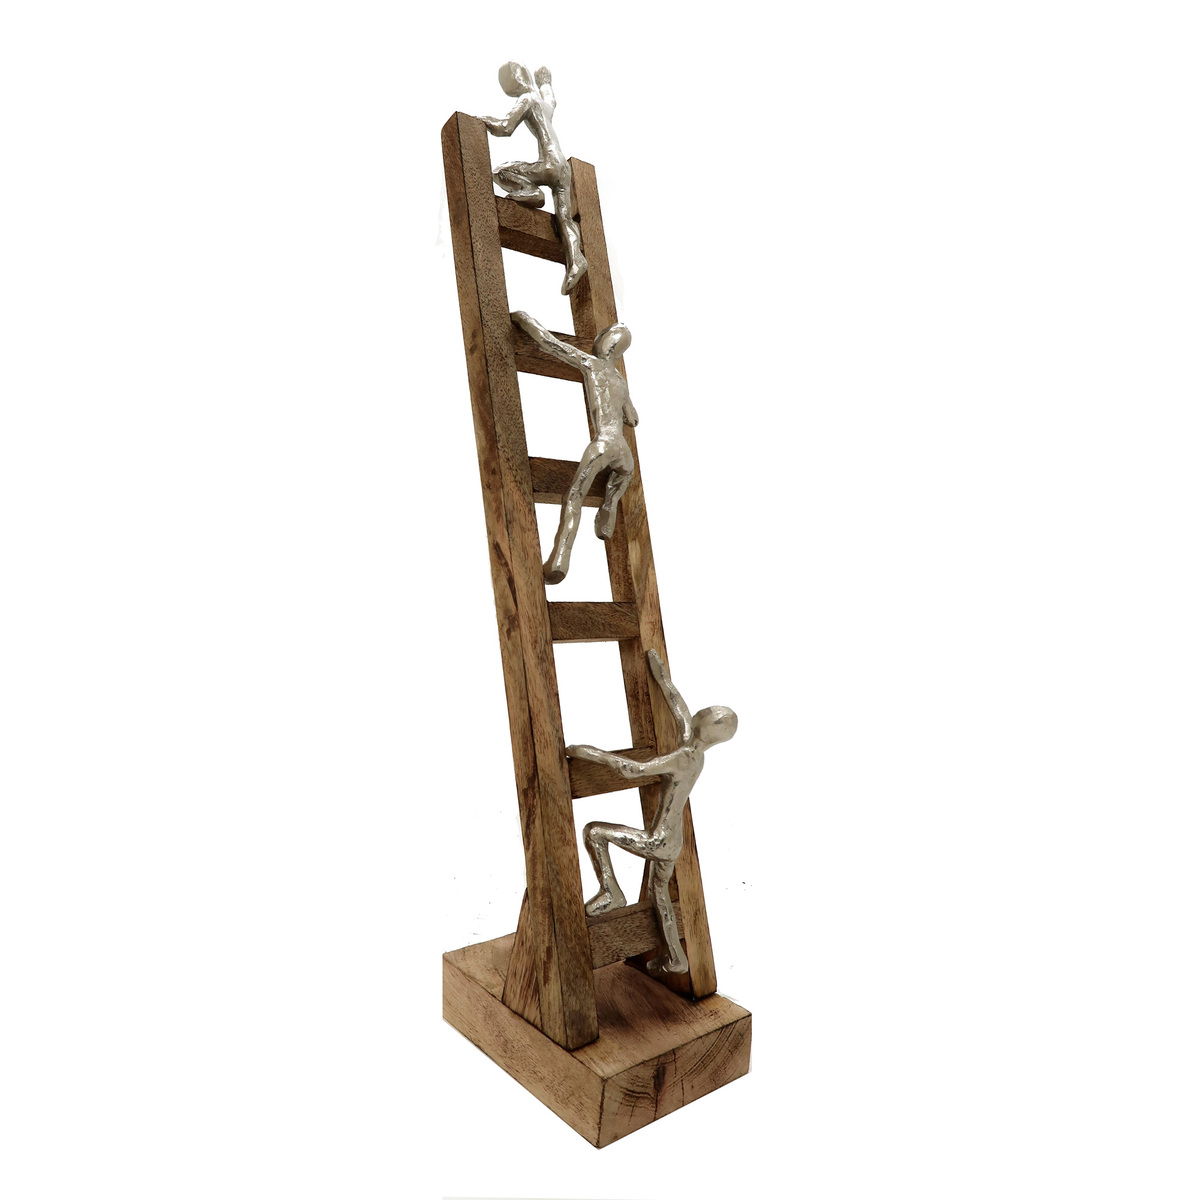 Maple Leaf Home 3 Figures Climbing on Ladder, Silver, FFG-2441